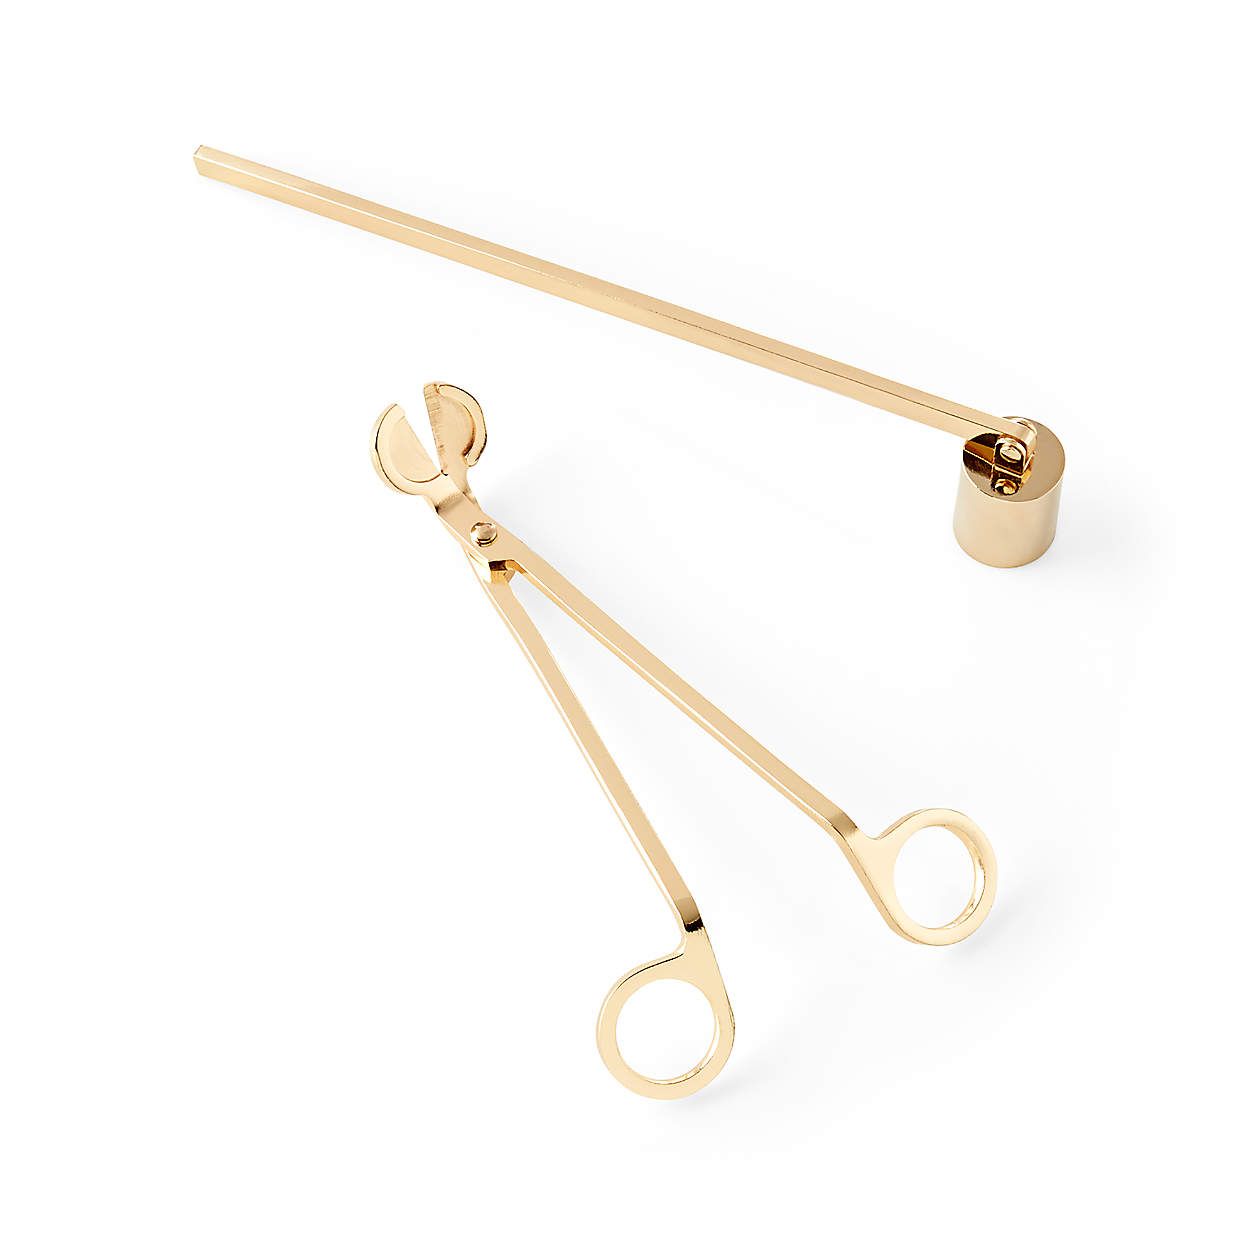 ILLUME Gold Wick Trimmer + Reviews | Crate and Barrel | Crate & Barrel